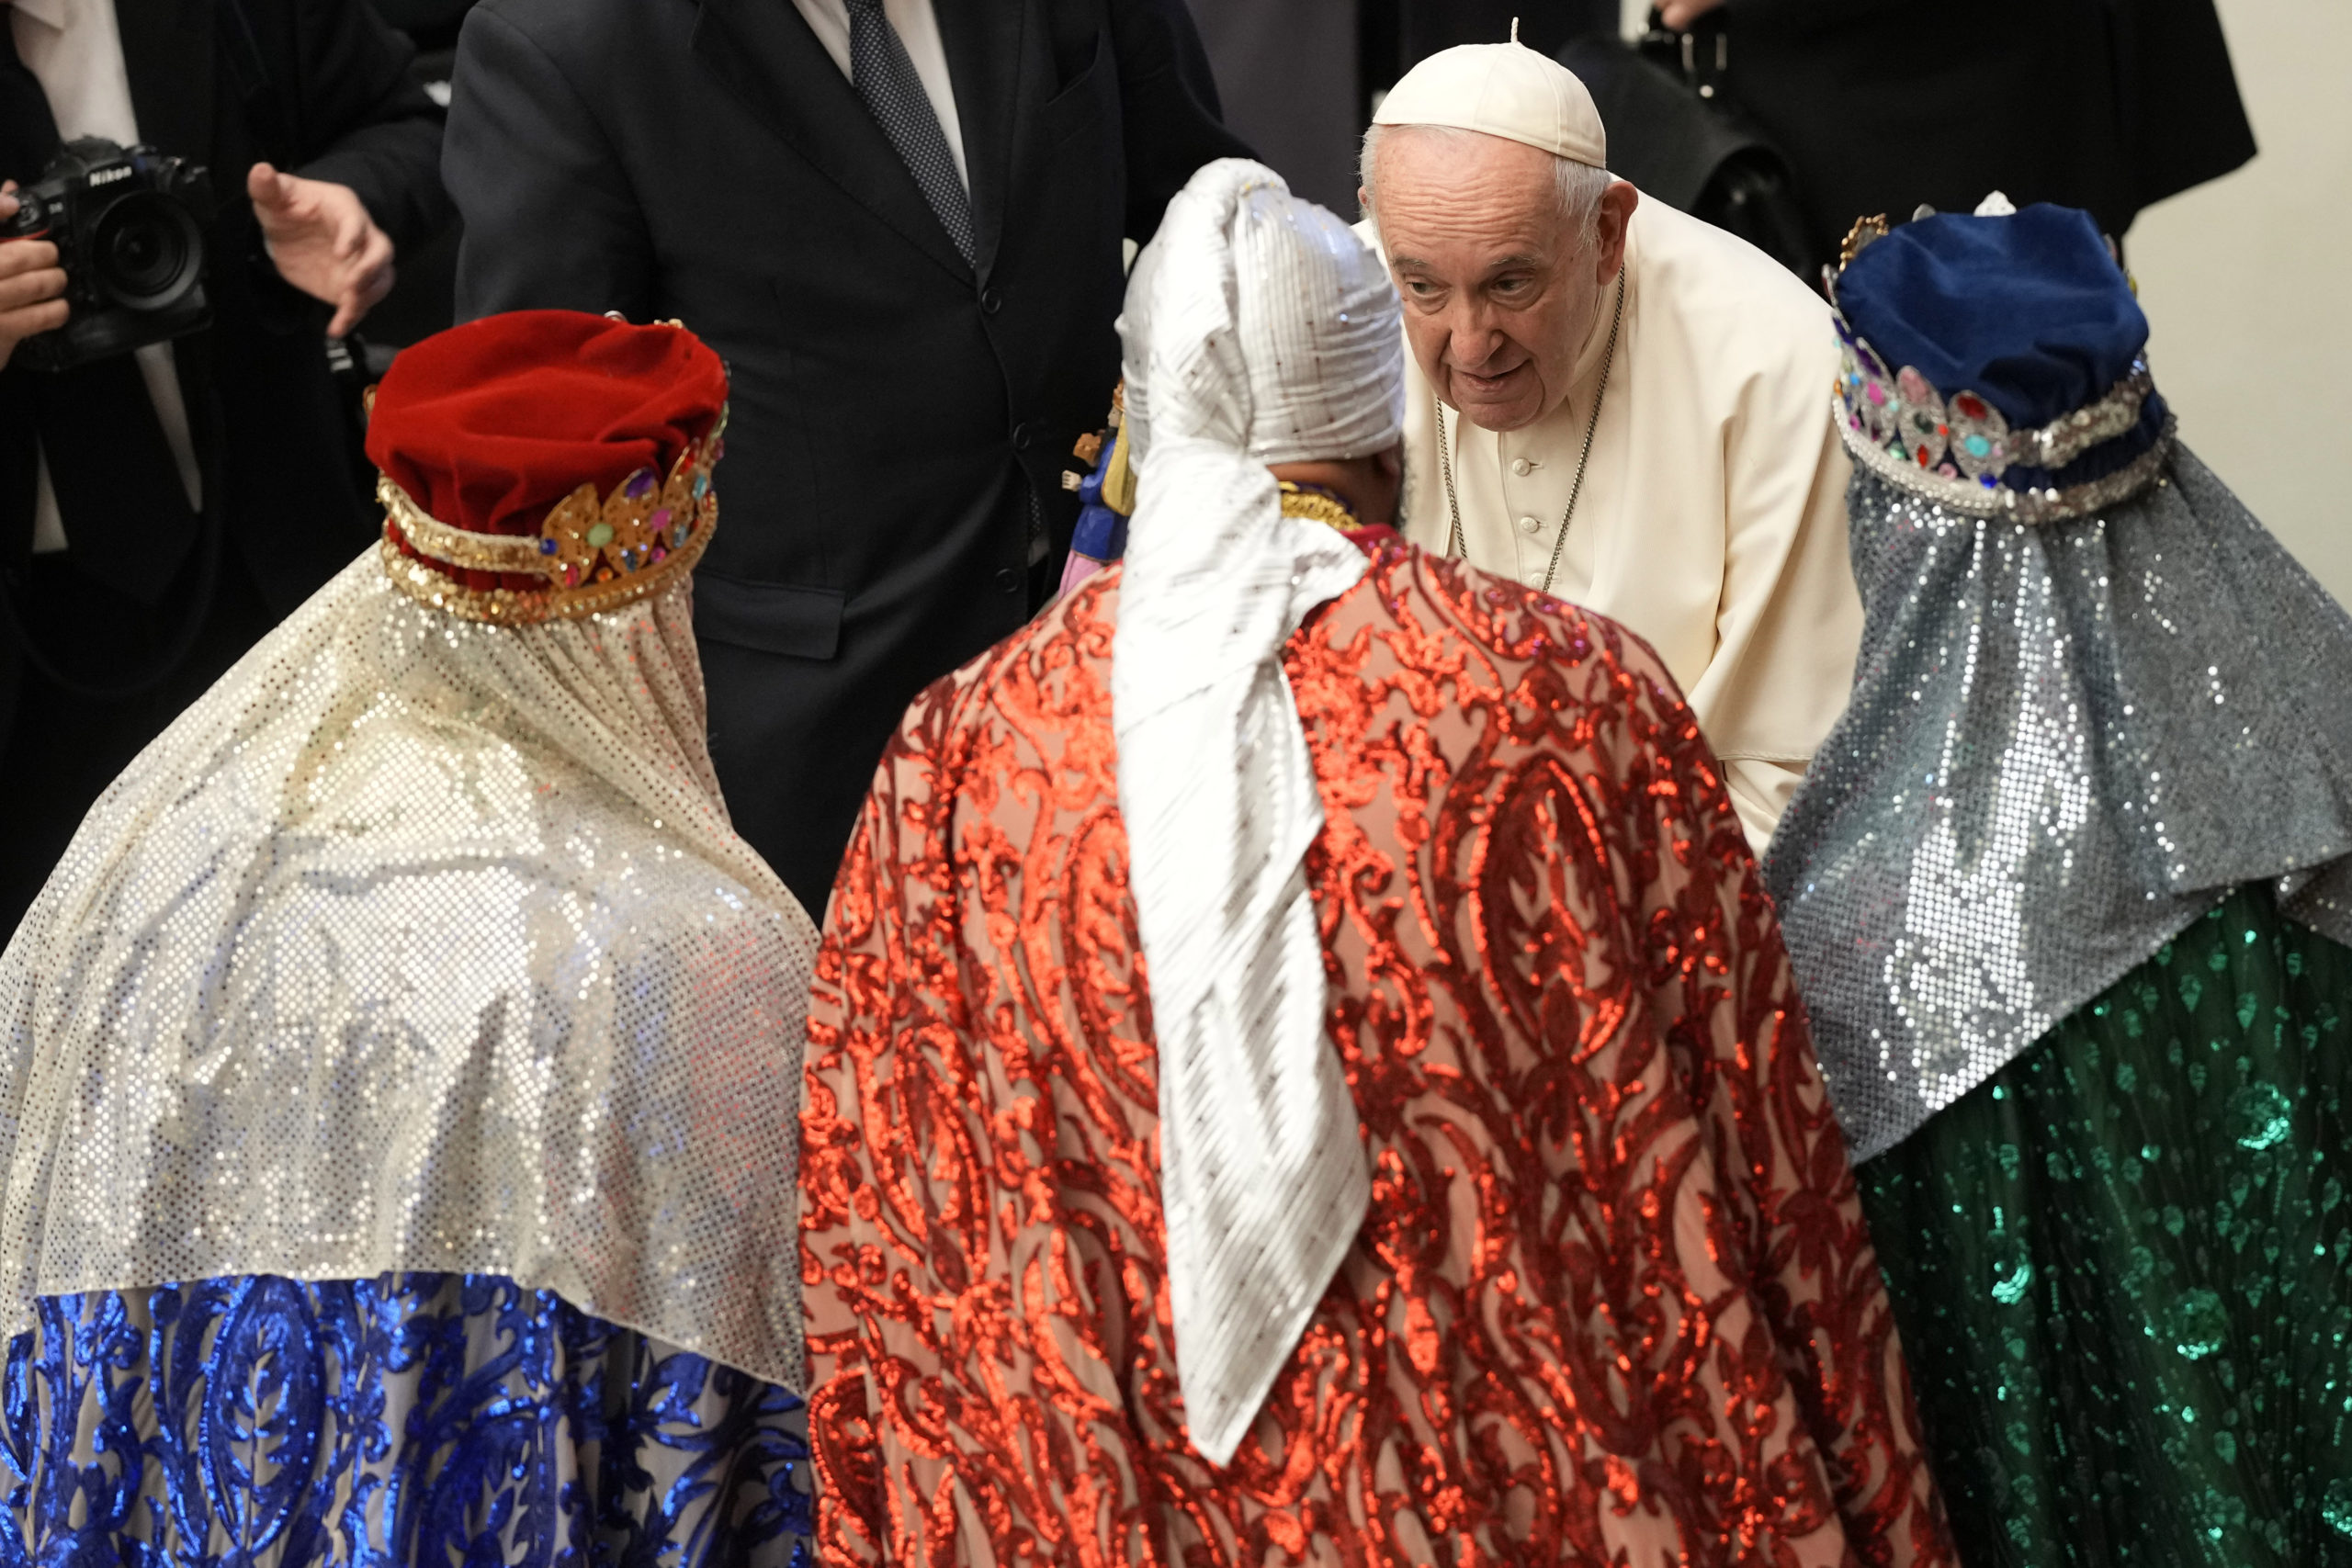 Pope Francis talks to men dressed as the three wise men at the end of his weekly general audience in the Paul VI Hall at the Vatican on Wednesday.